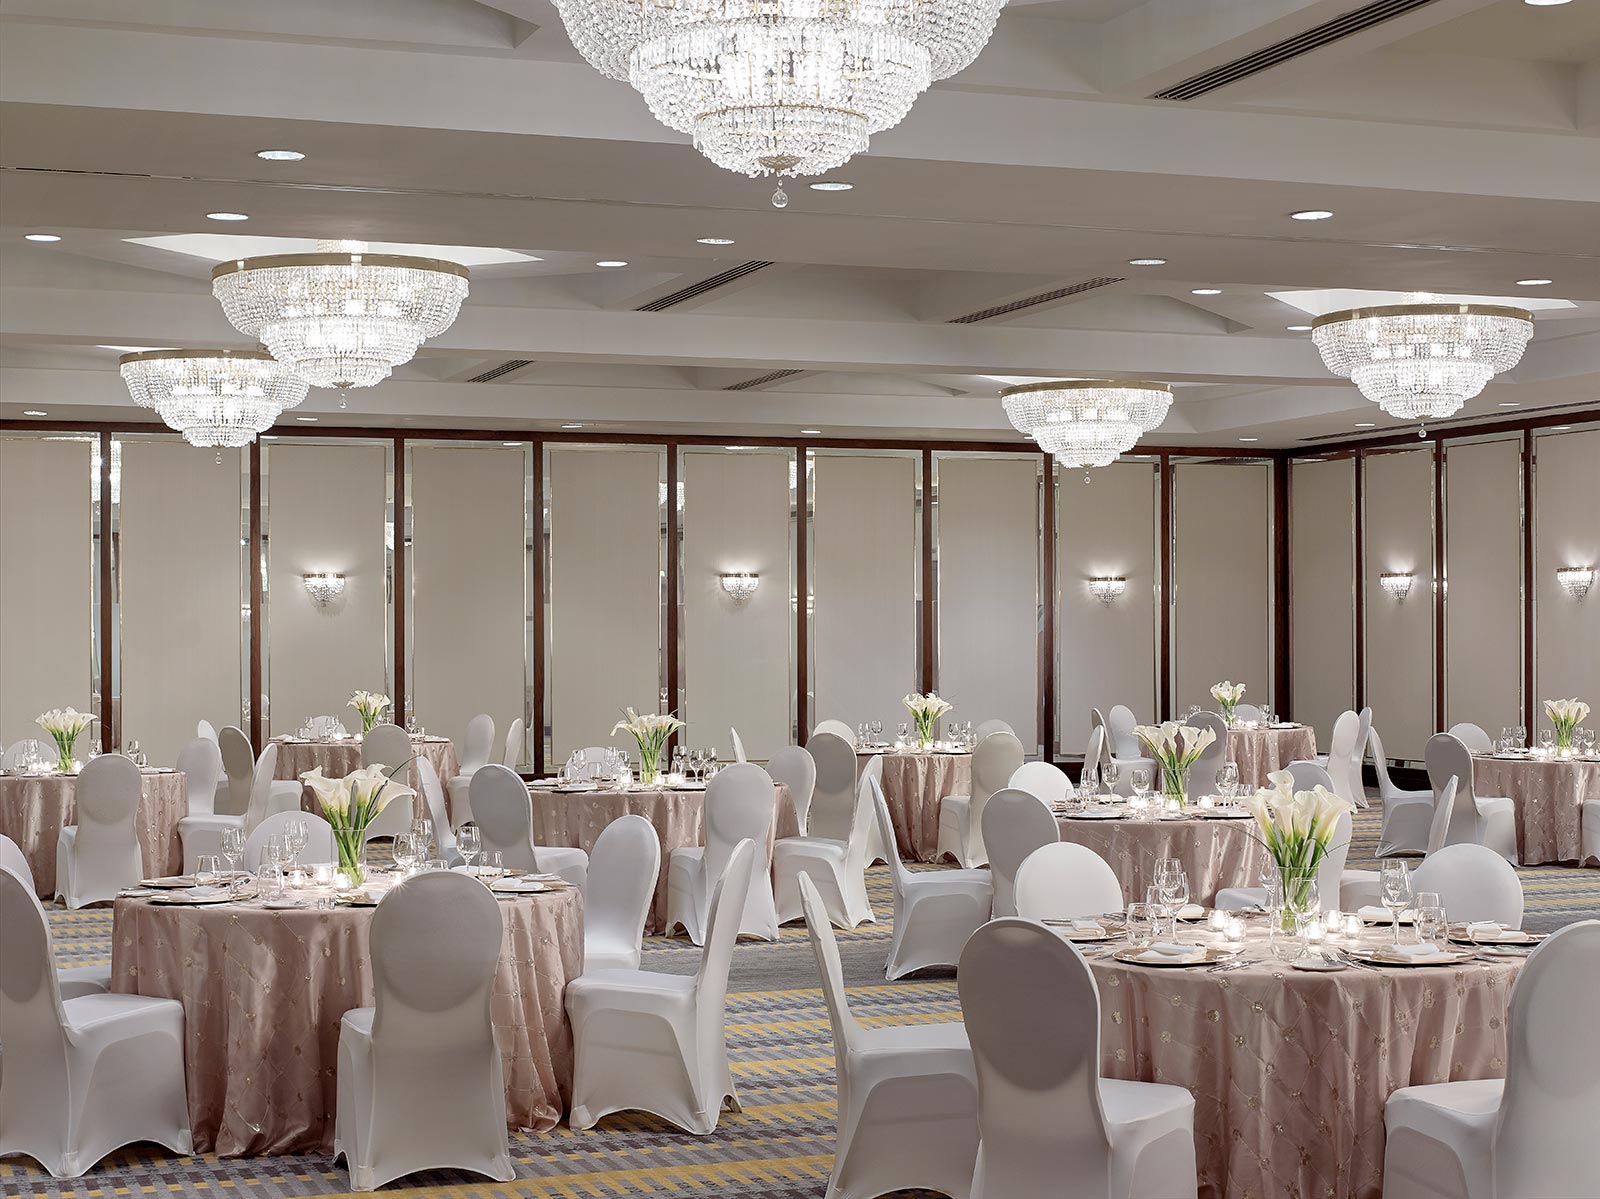 churchhill-standup-dinner, Corporate Meeting & Conference Rooms in Chelsea Hotel, Toronto